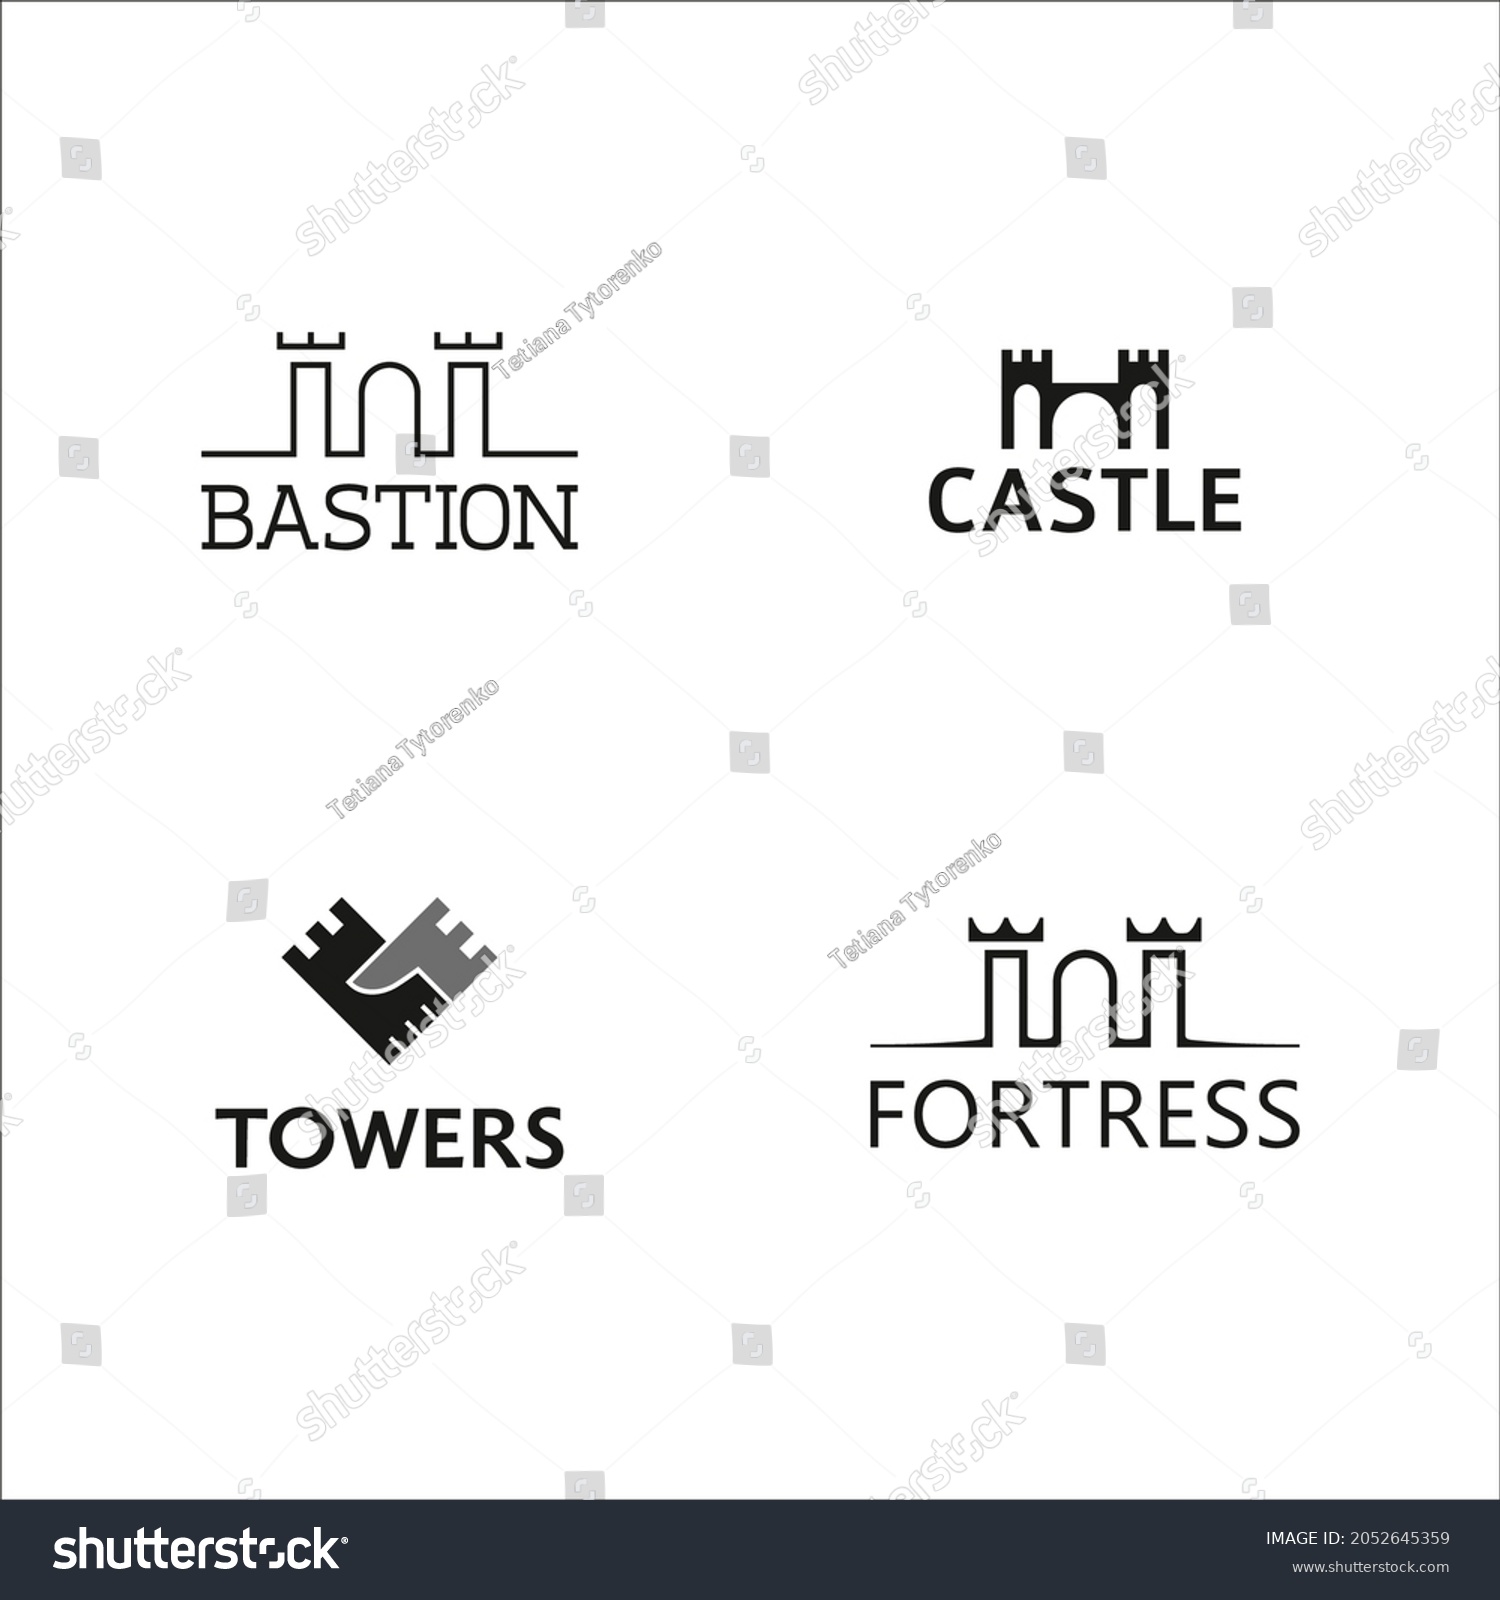 SVG of Logo design with bastion, castle, towers, fortress. Company logo. svg